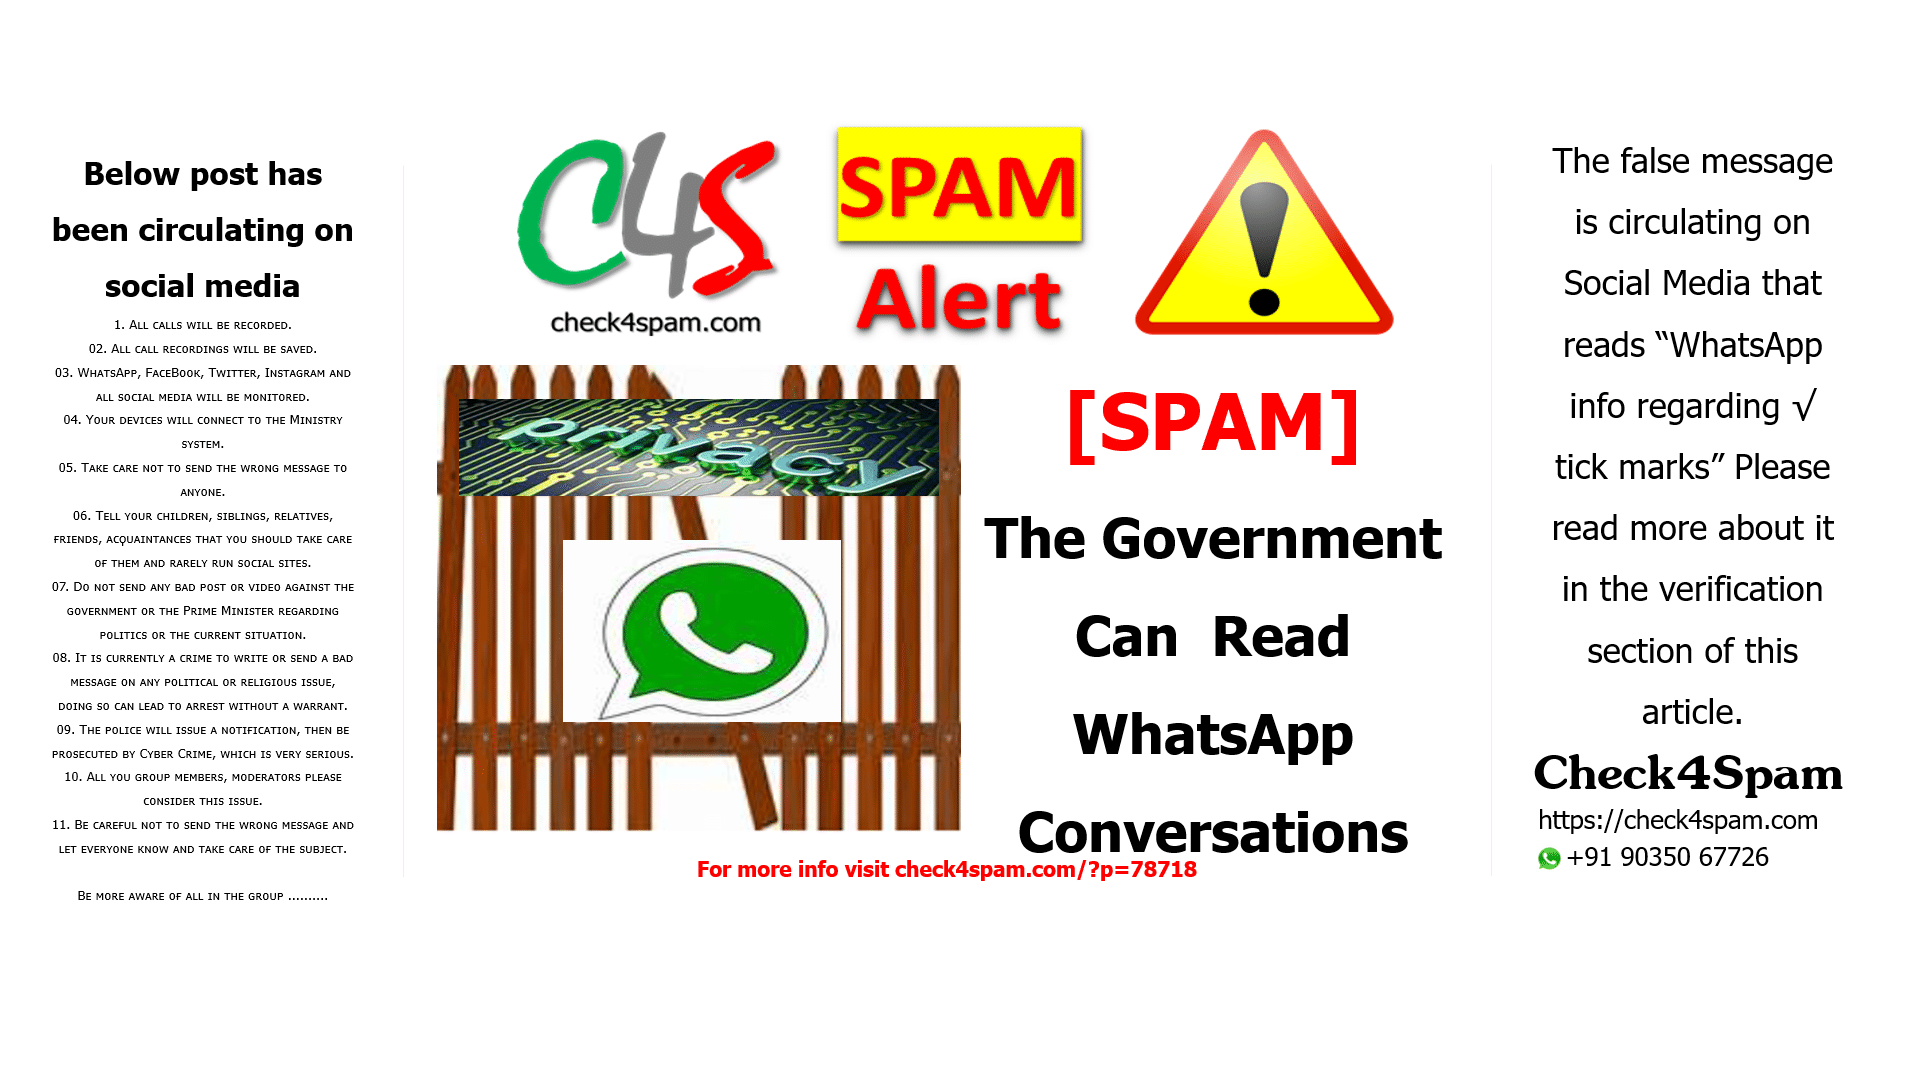 The Government Can Read WhatsApp Conversations